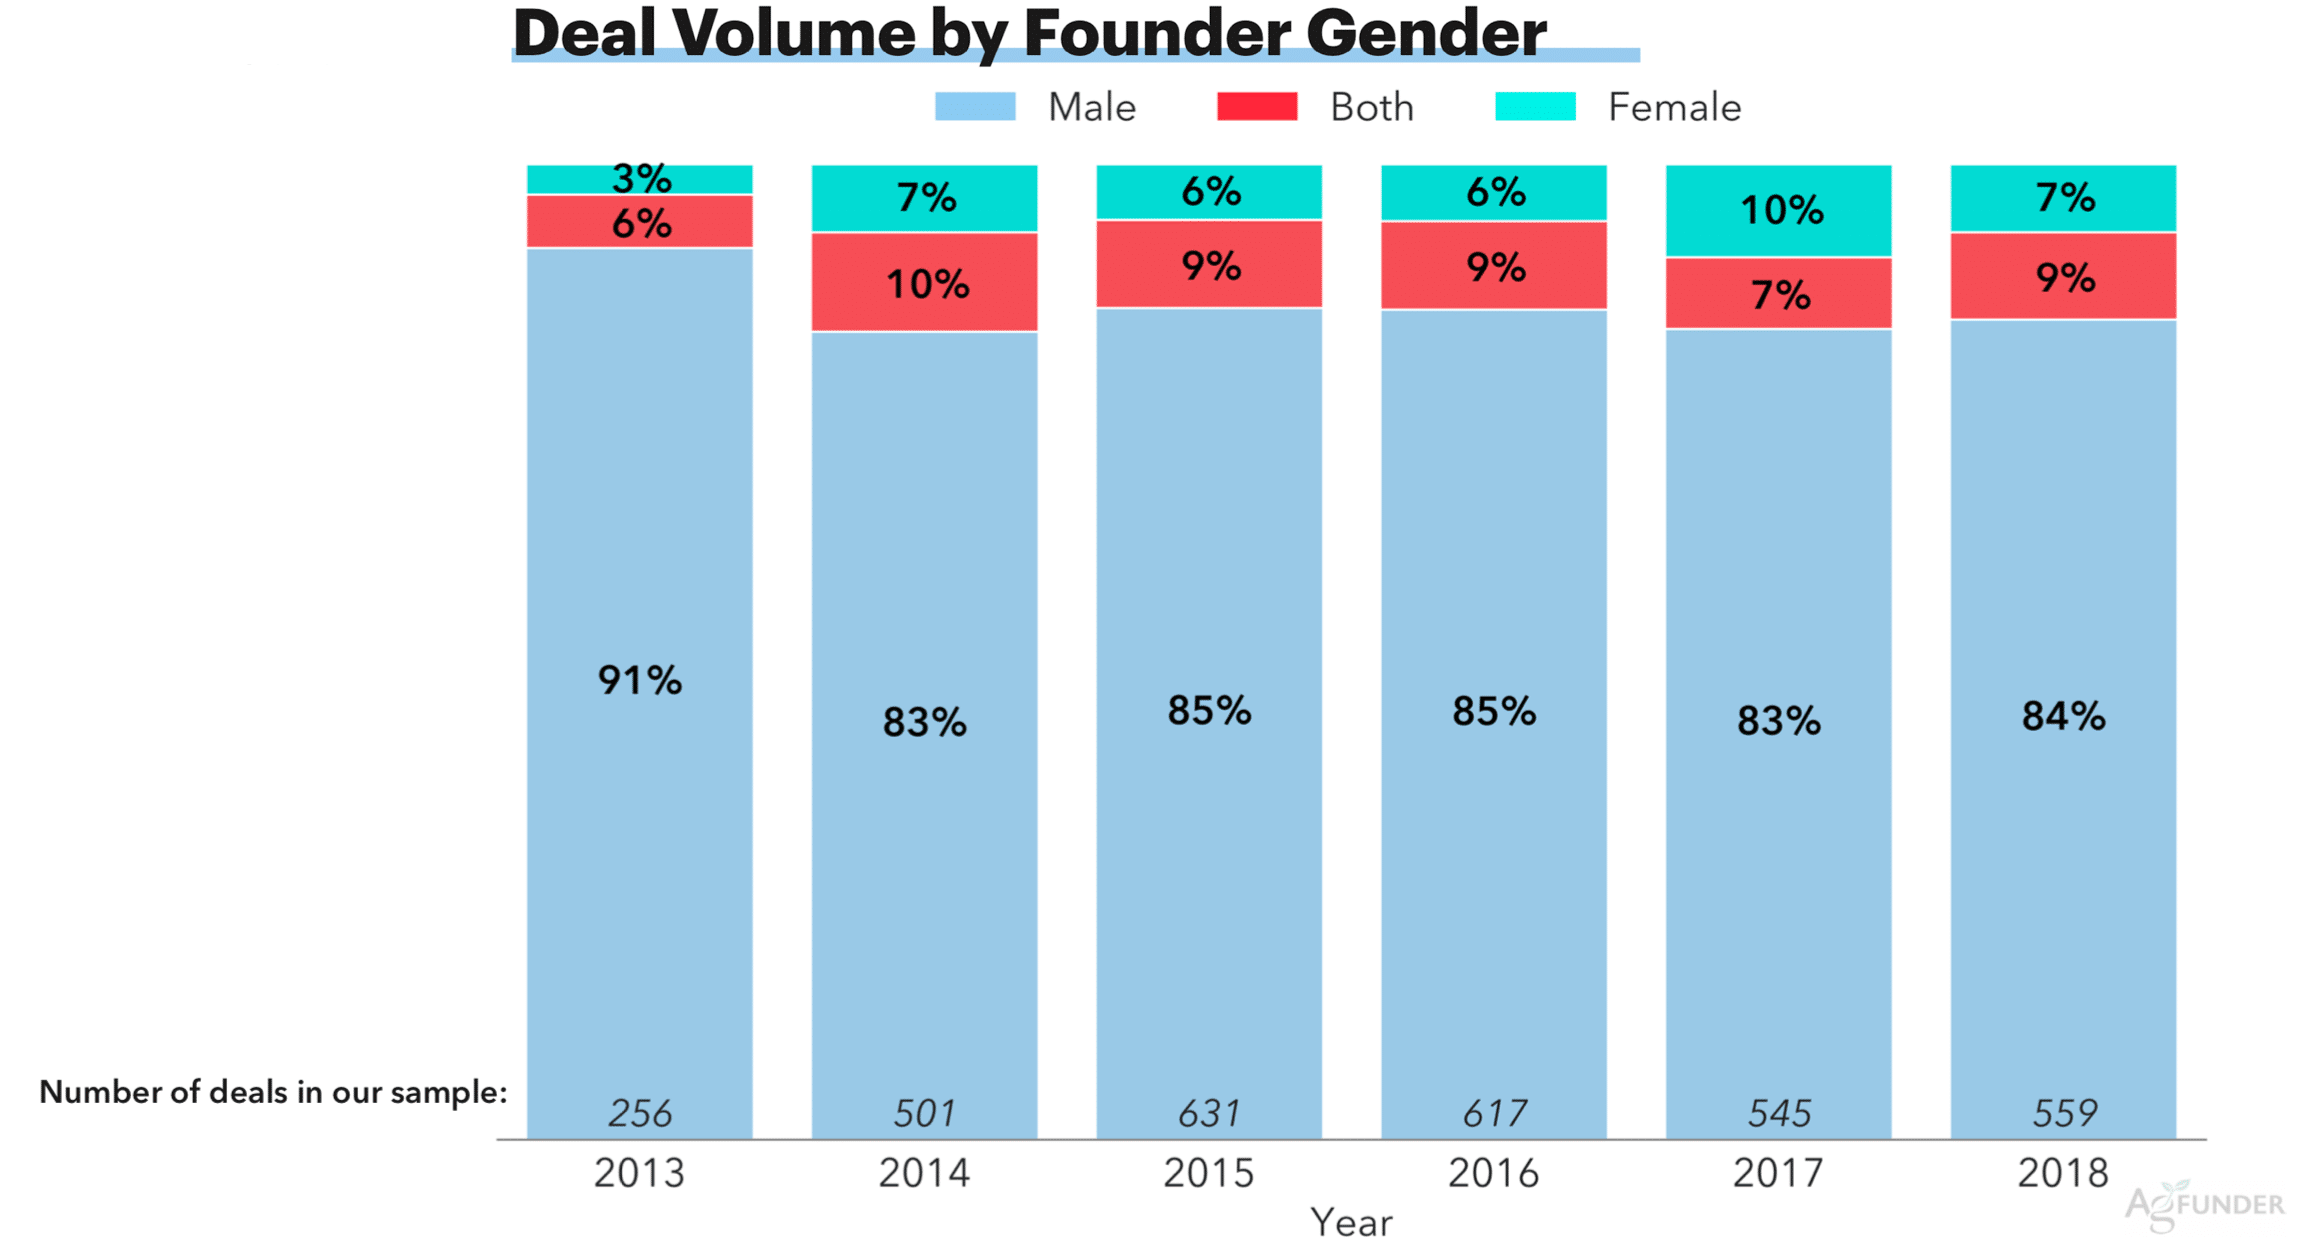 Deal Volume by Founder Gender - AgriFoodTech